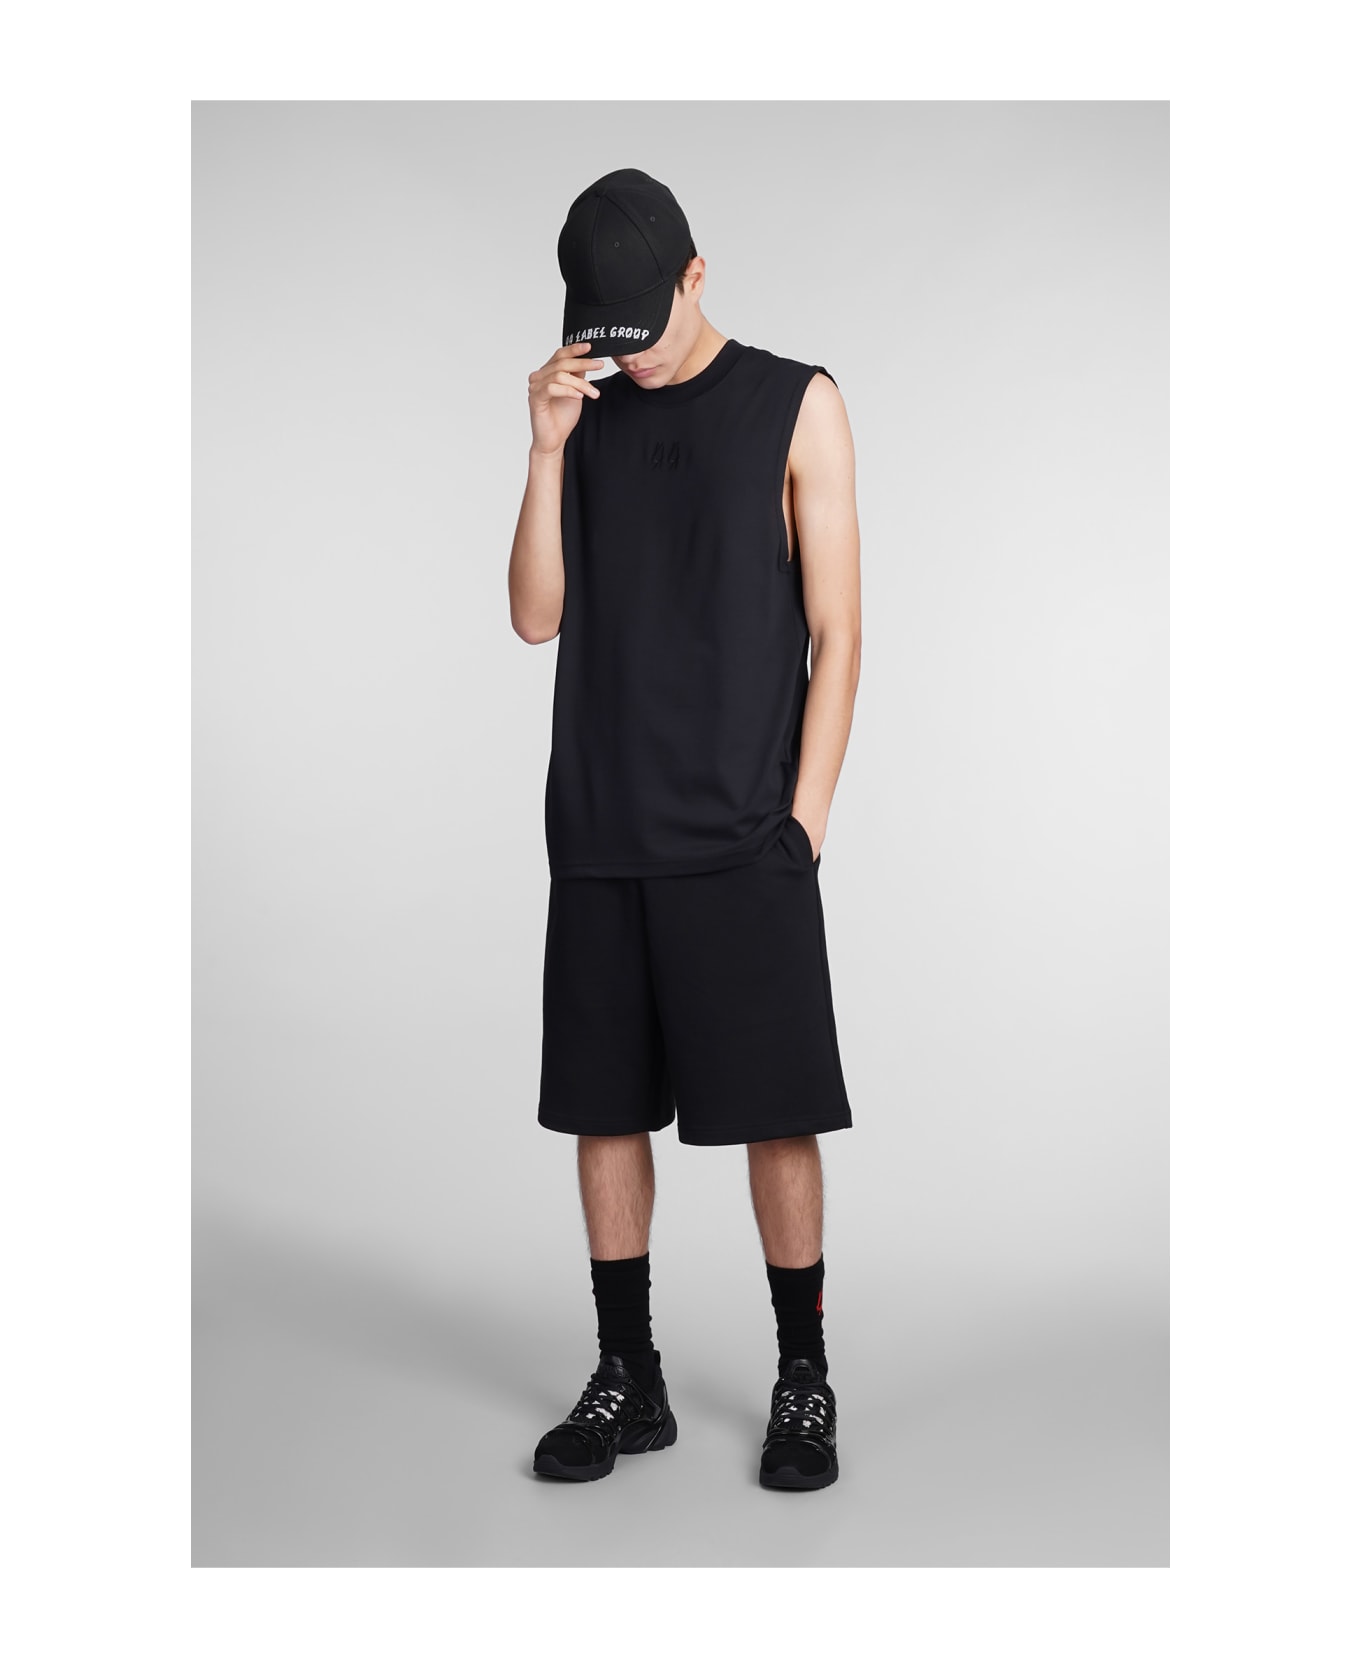 44 Label Group Tank Top In Black Cotton